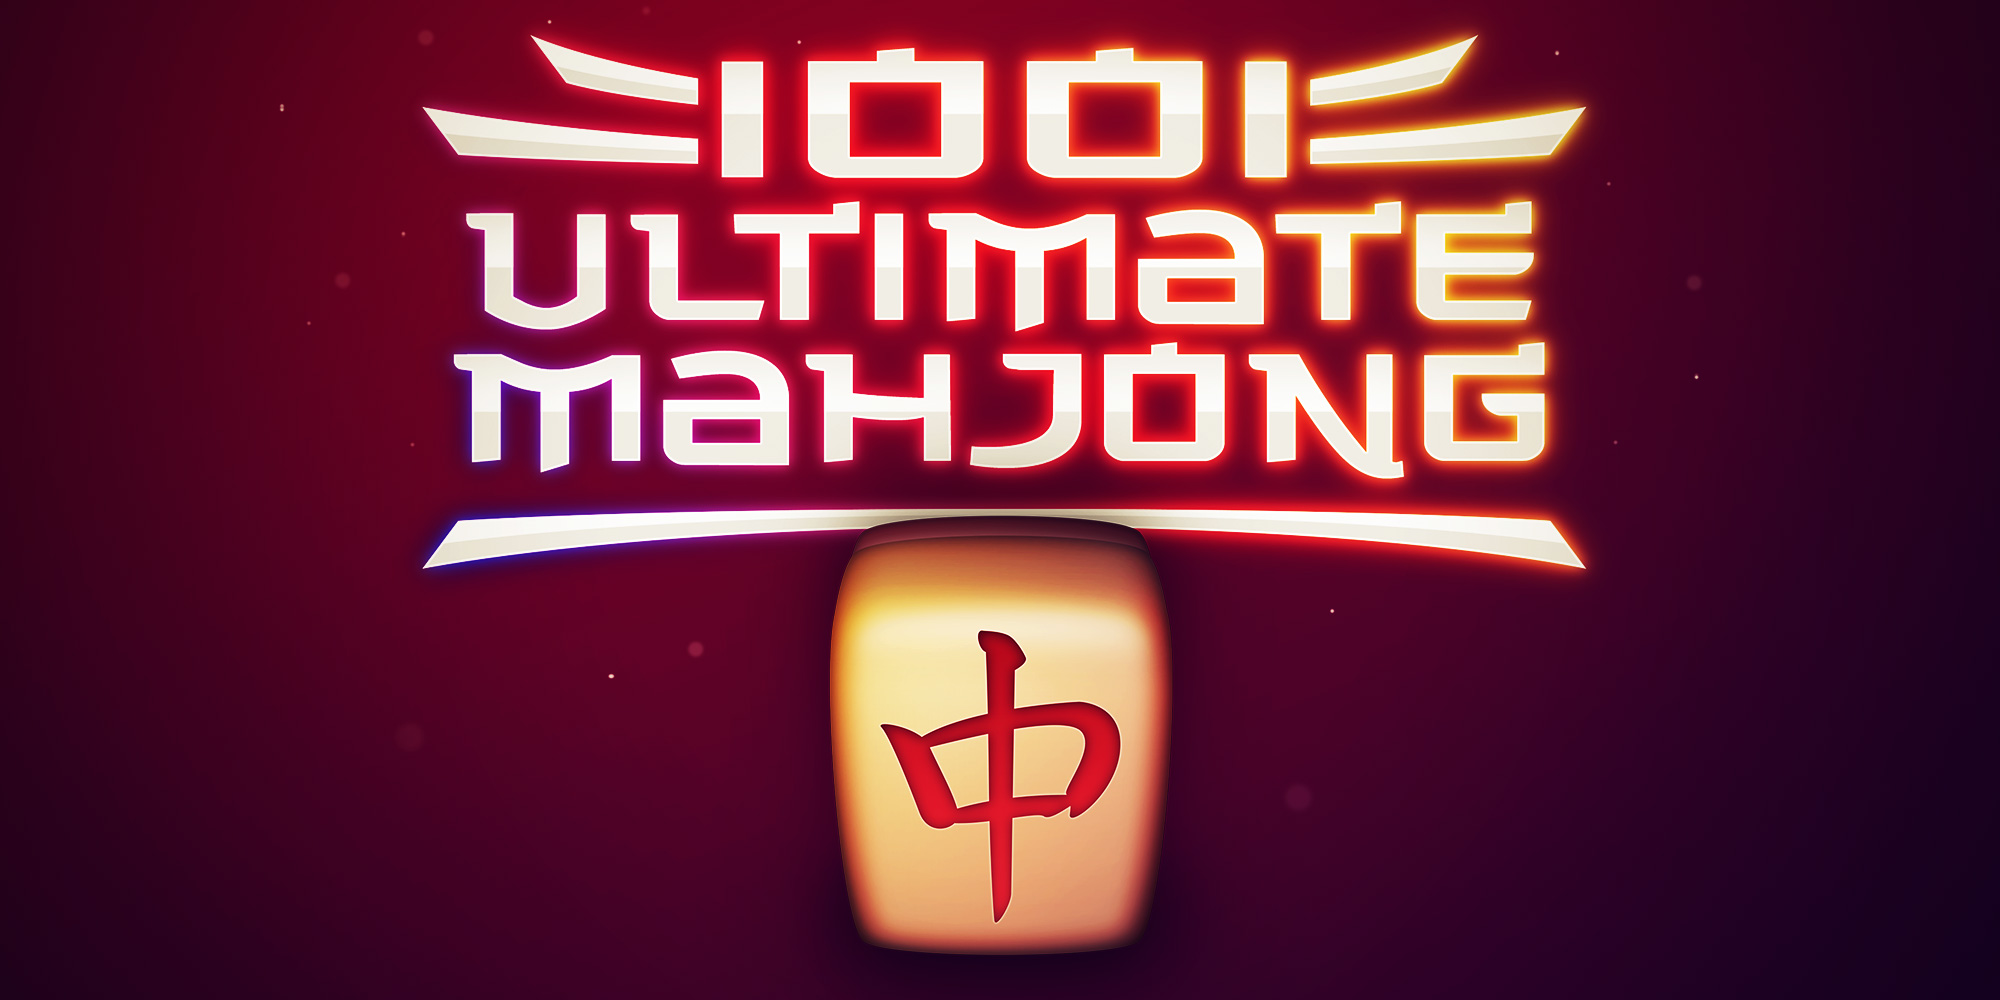 1001 Ultimate Mahjong ™ 2, Nintendo Switch download software, Games